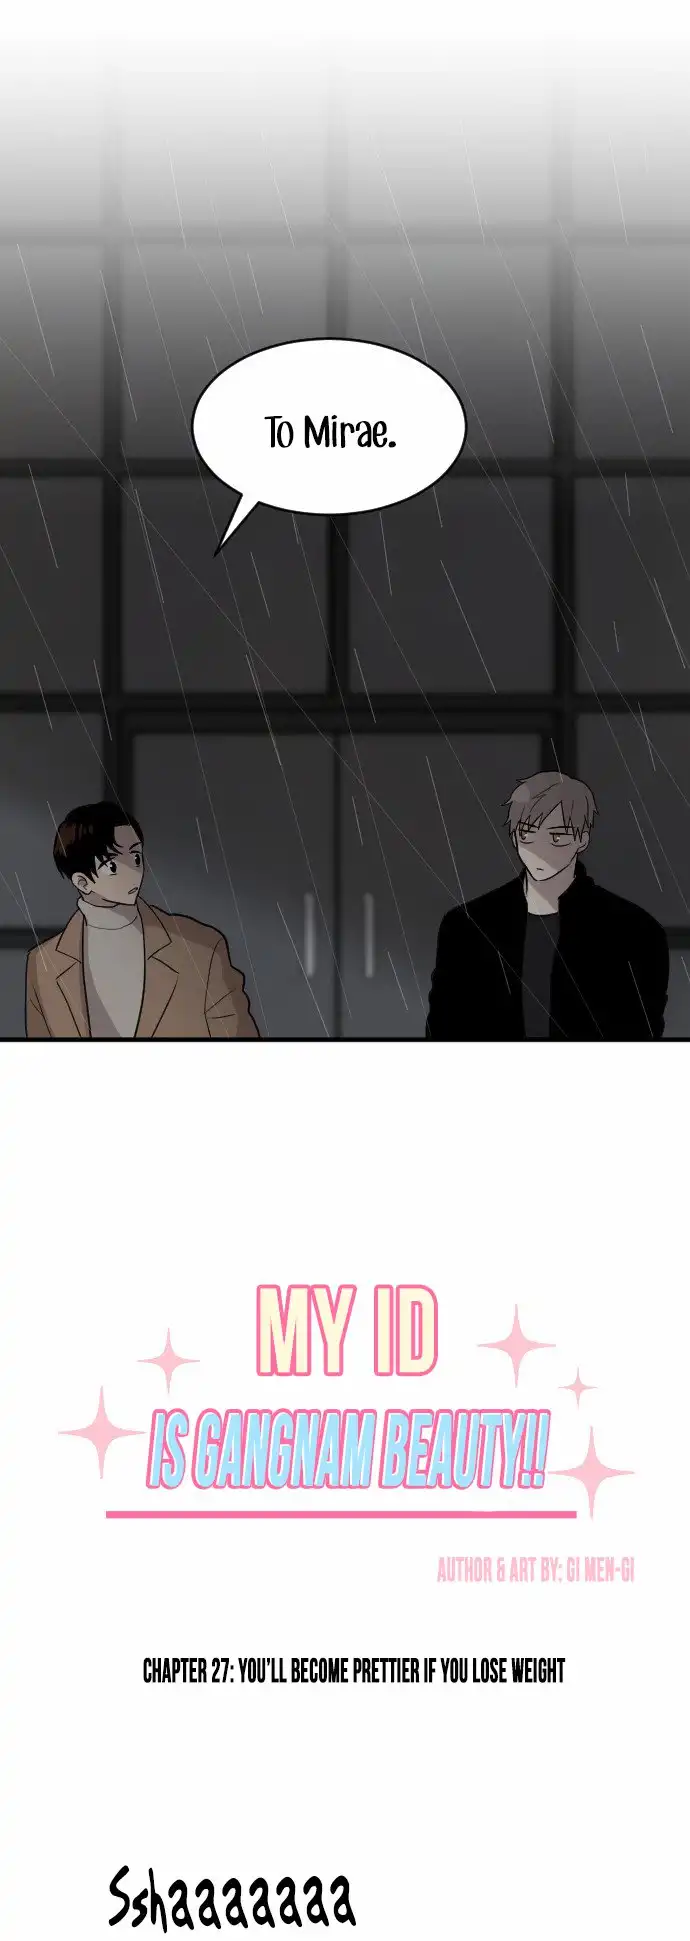 My ID is Gangnam Beauty - Chapter 27 Page 2